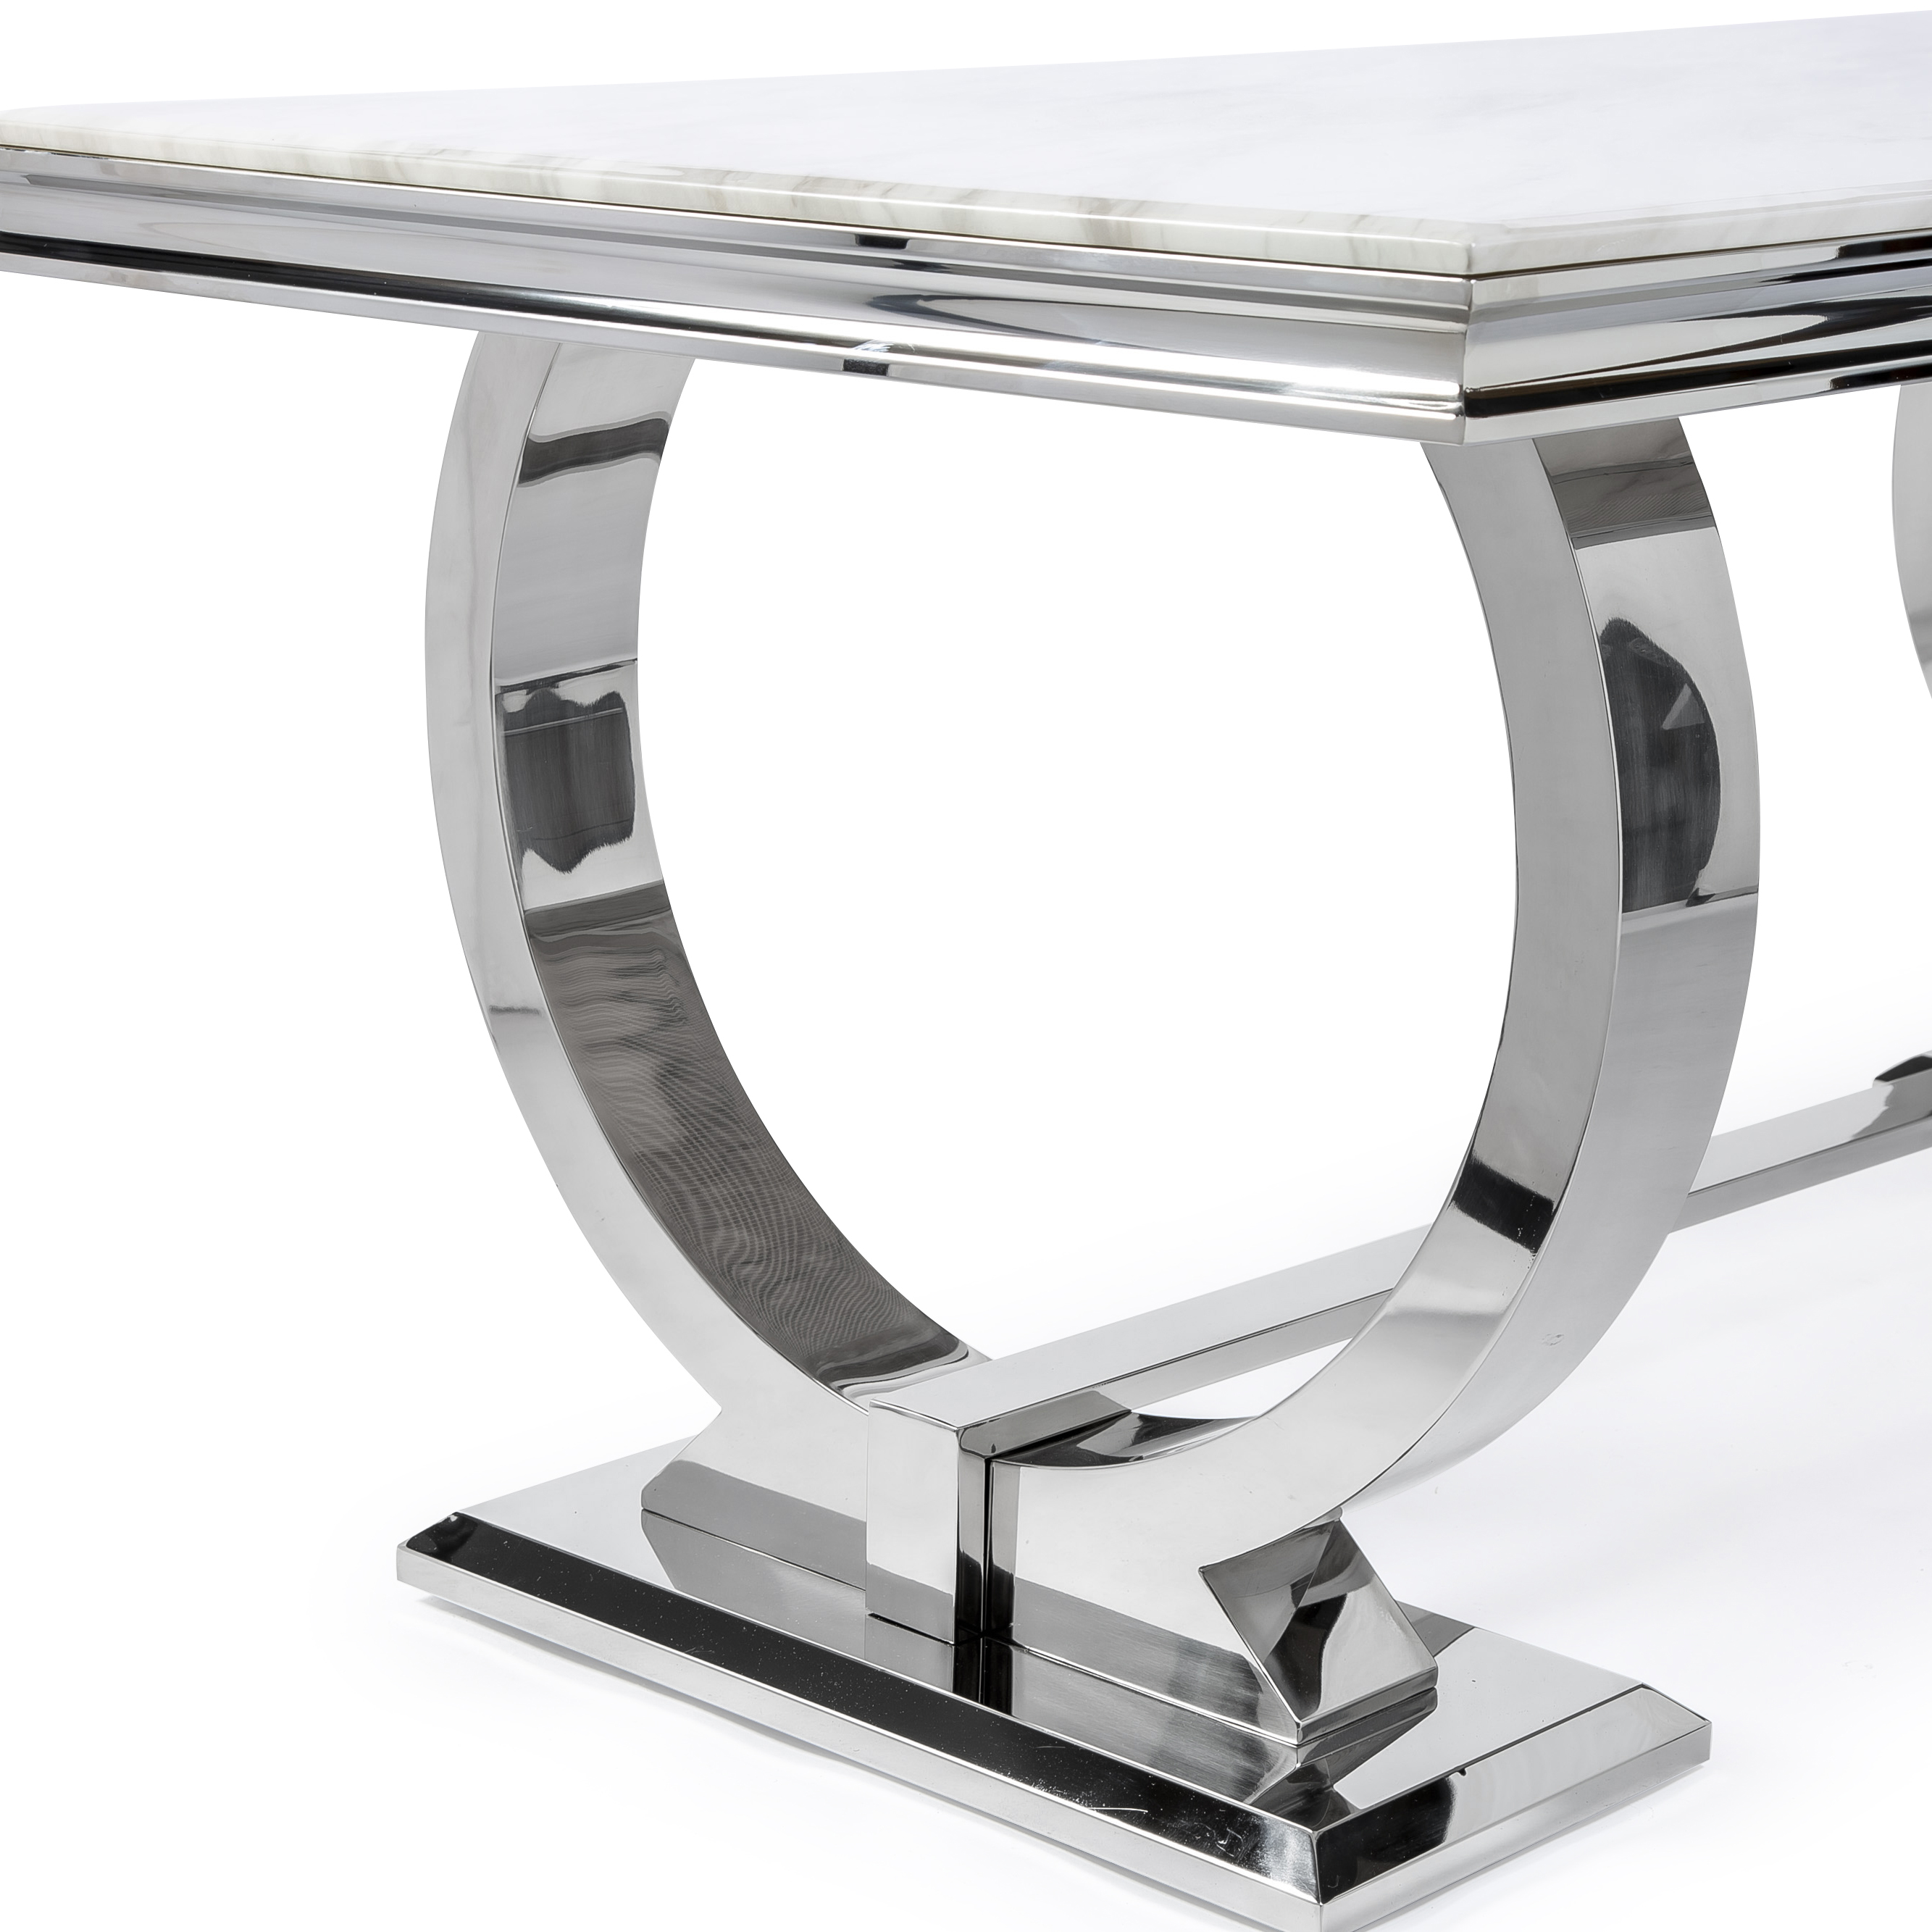 Siena 1.8M Polished Steel & Marble White Top Dining Table